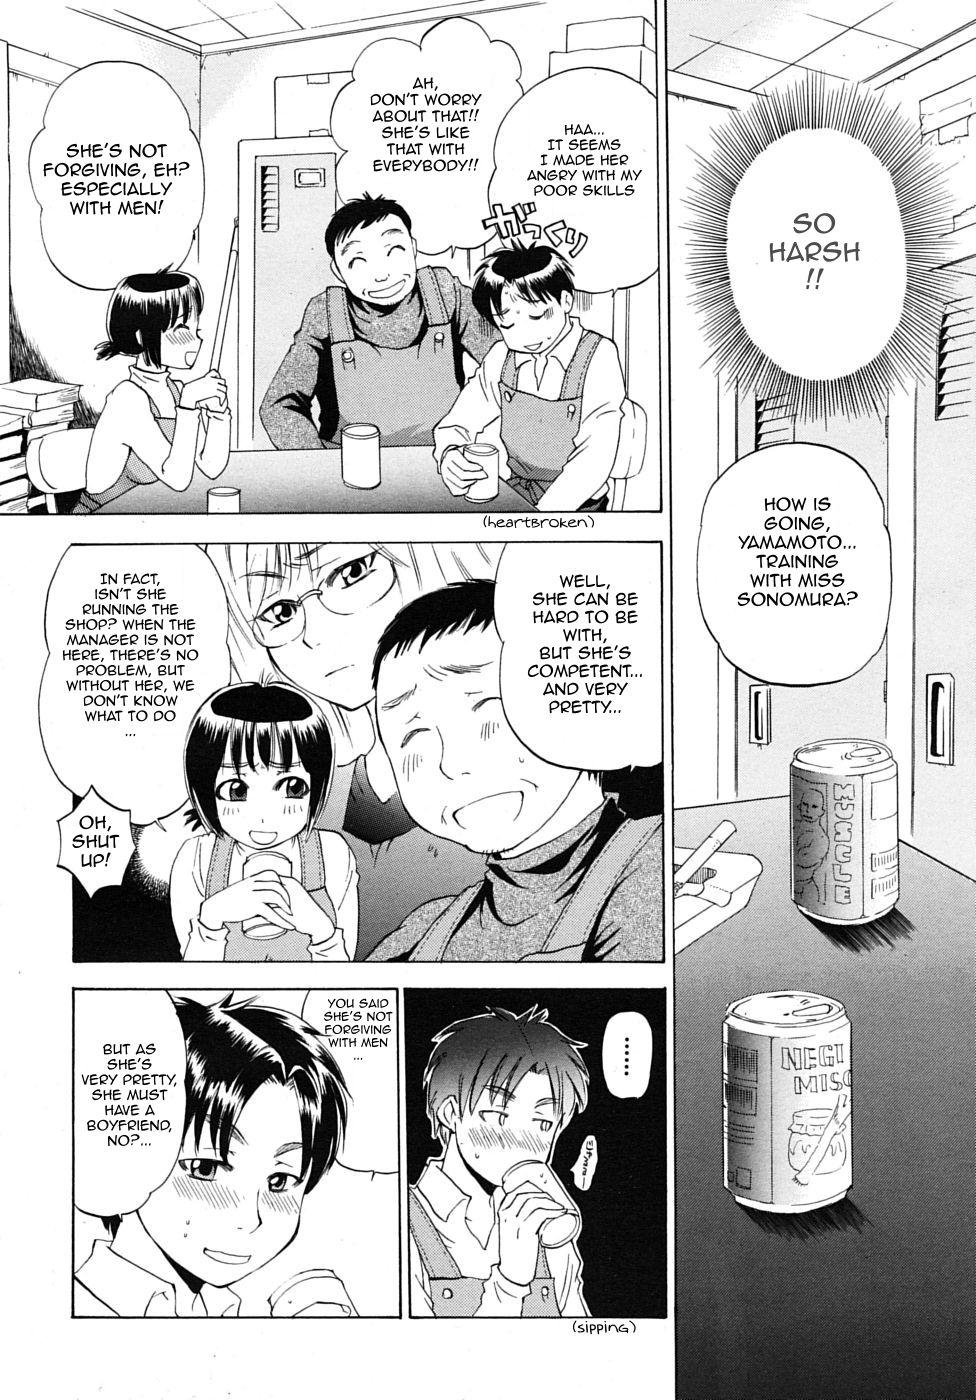 Wank Sonomura-san to Shinjin Kyouiku | Miss Sonomura and the Education of the Newcomer Foreplay - Page 6